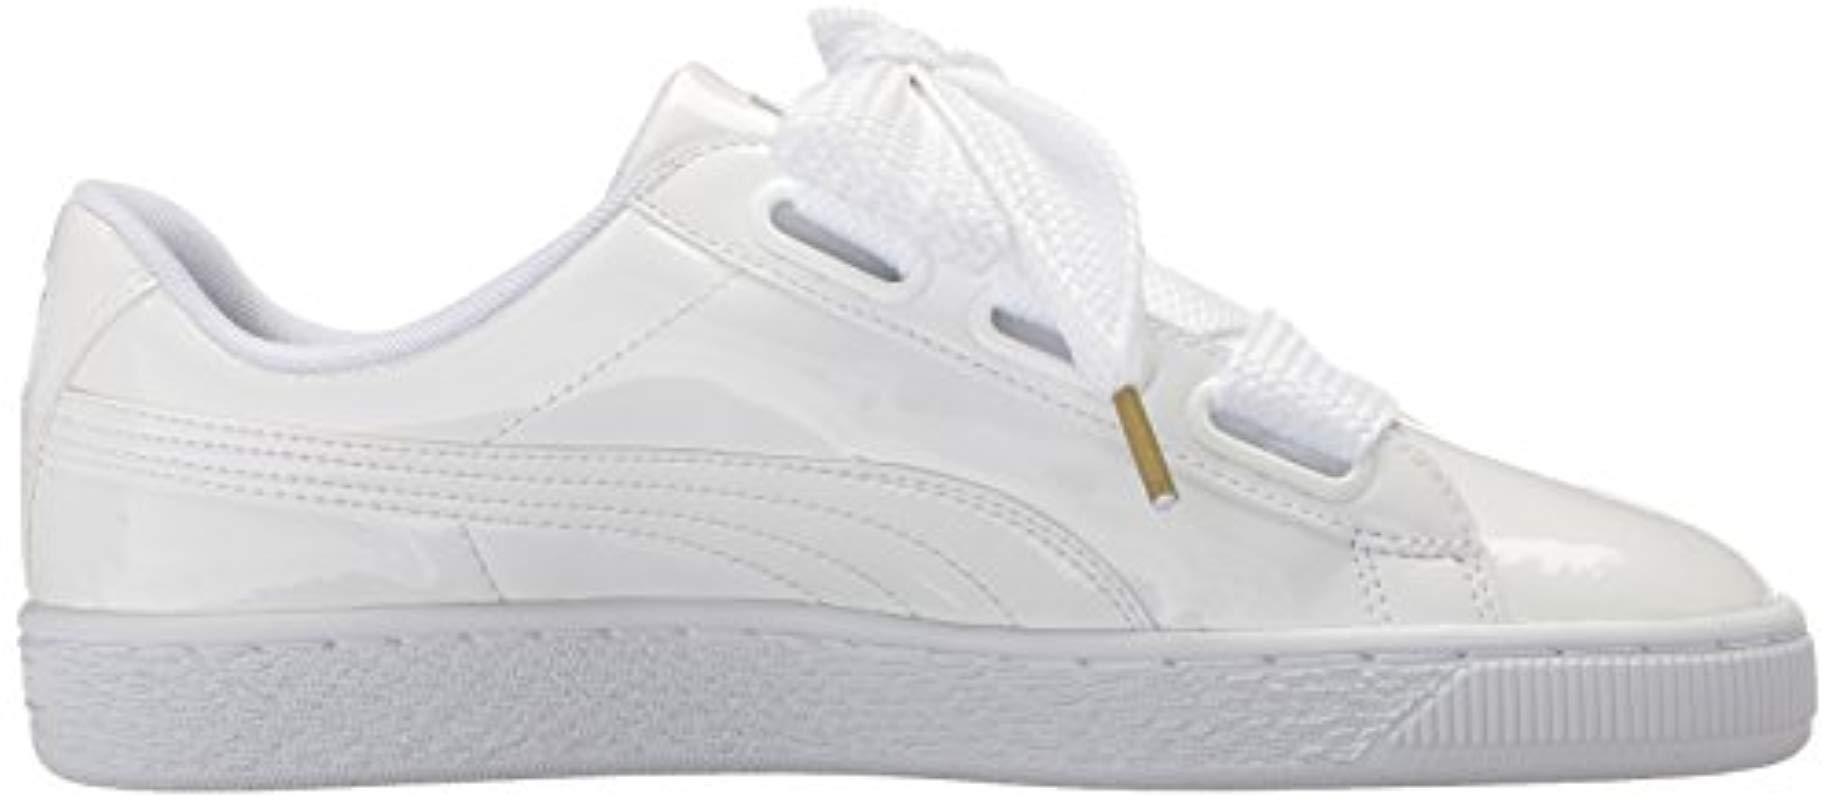 PUMA Basket Heart Patent Wn's Trainers in White-White (White) | Lyst